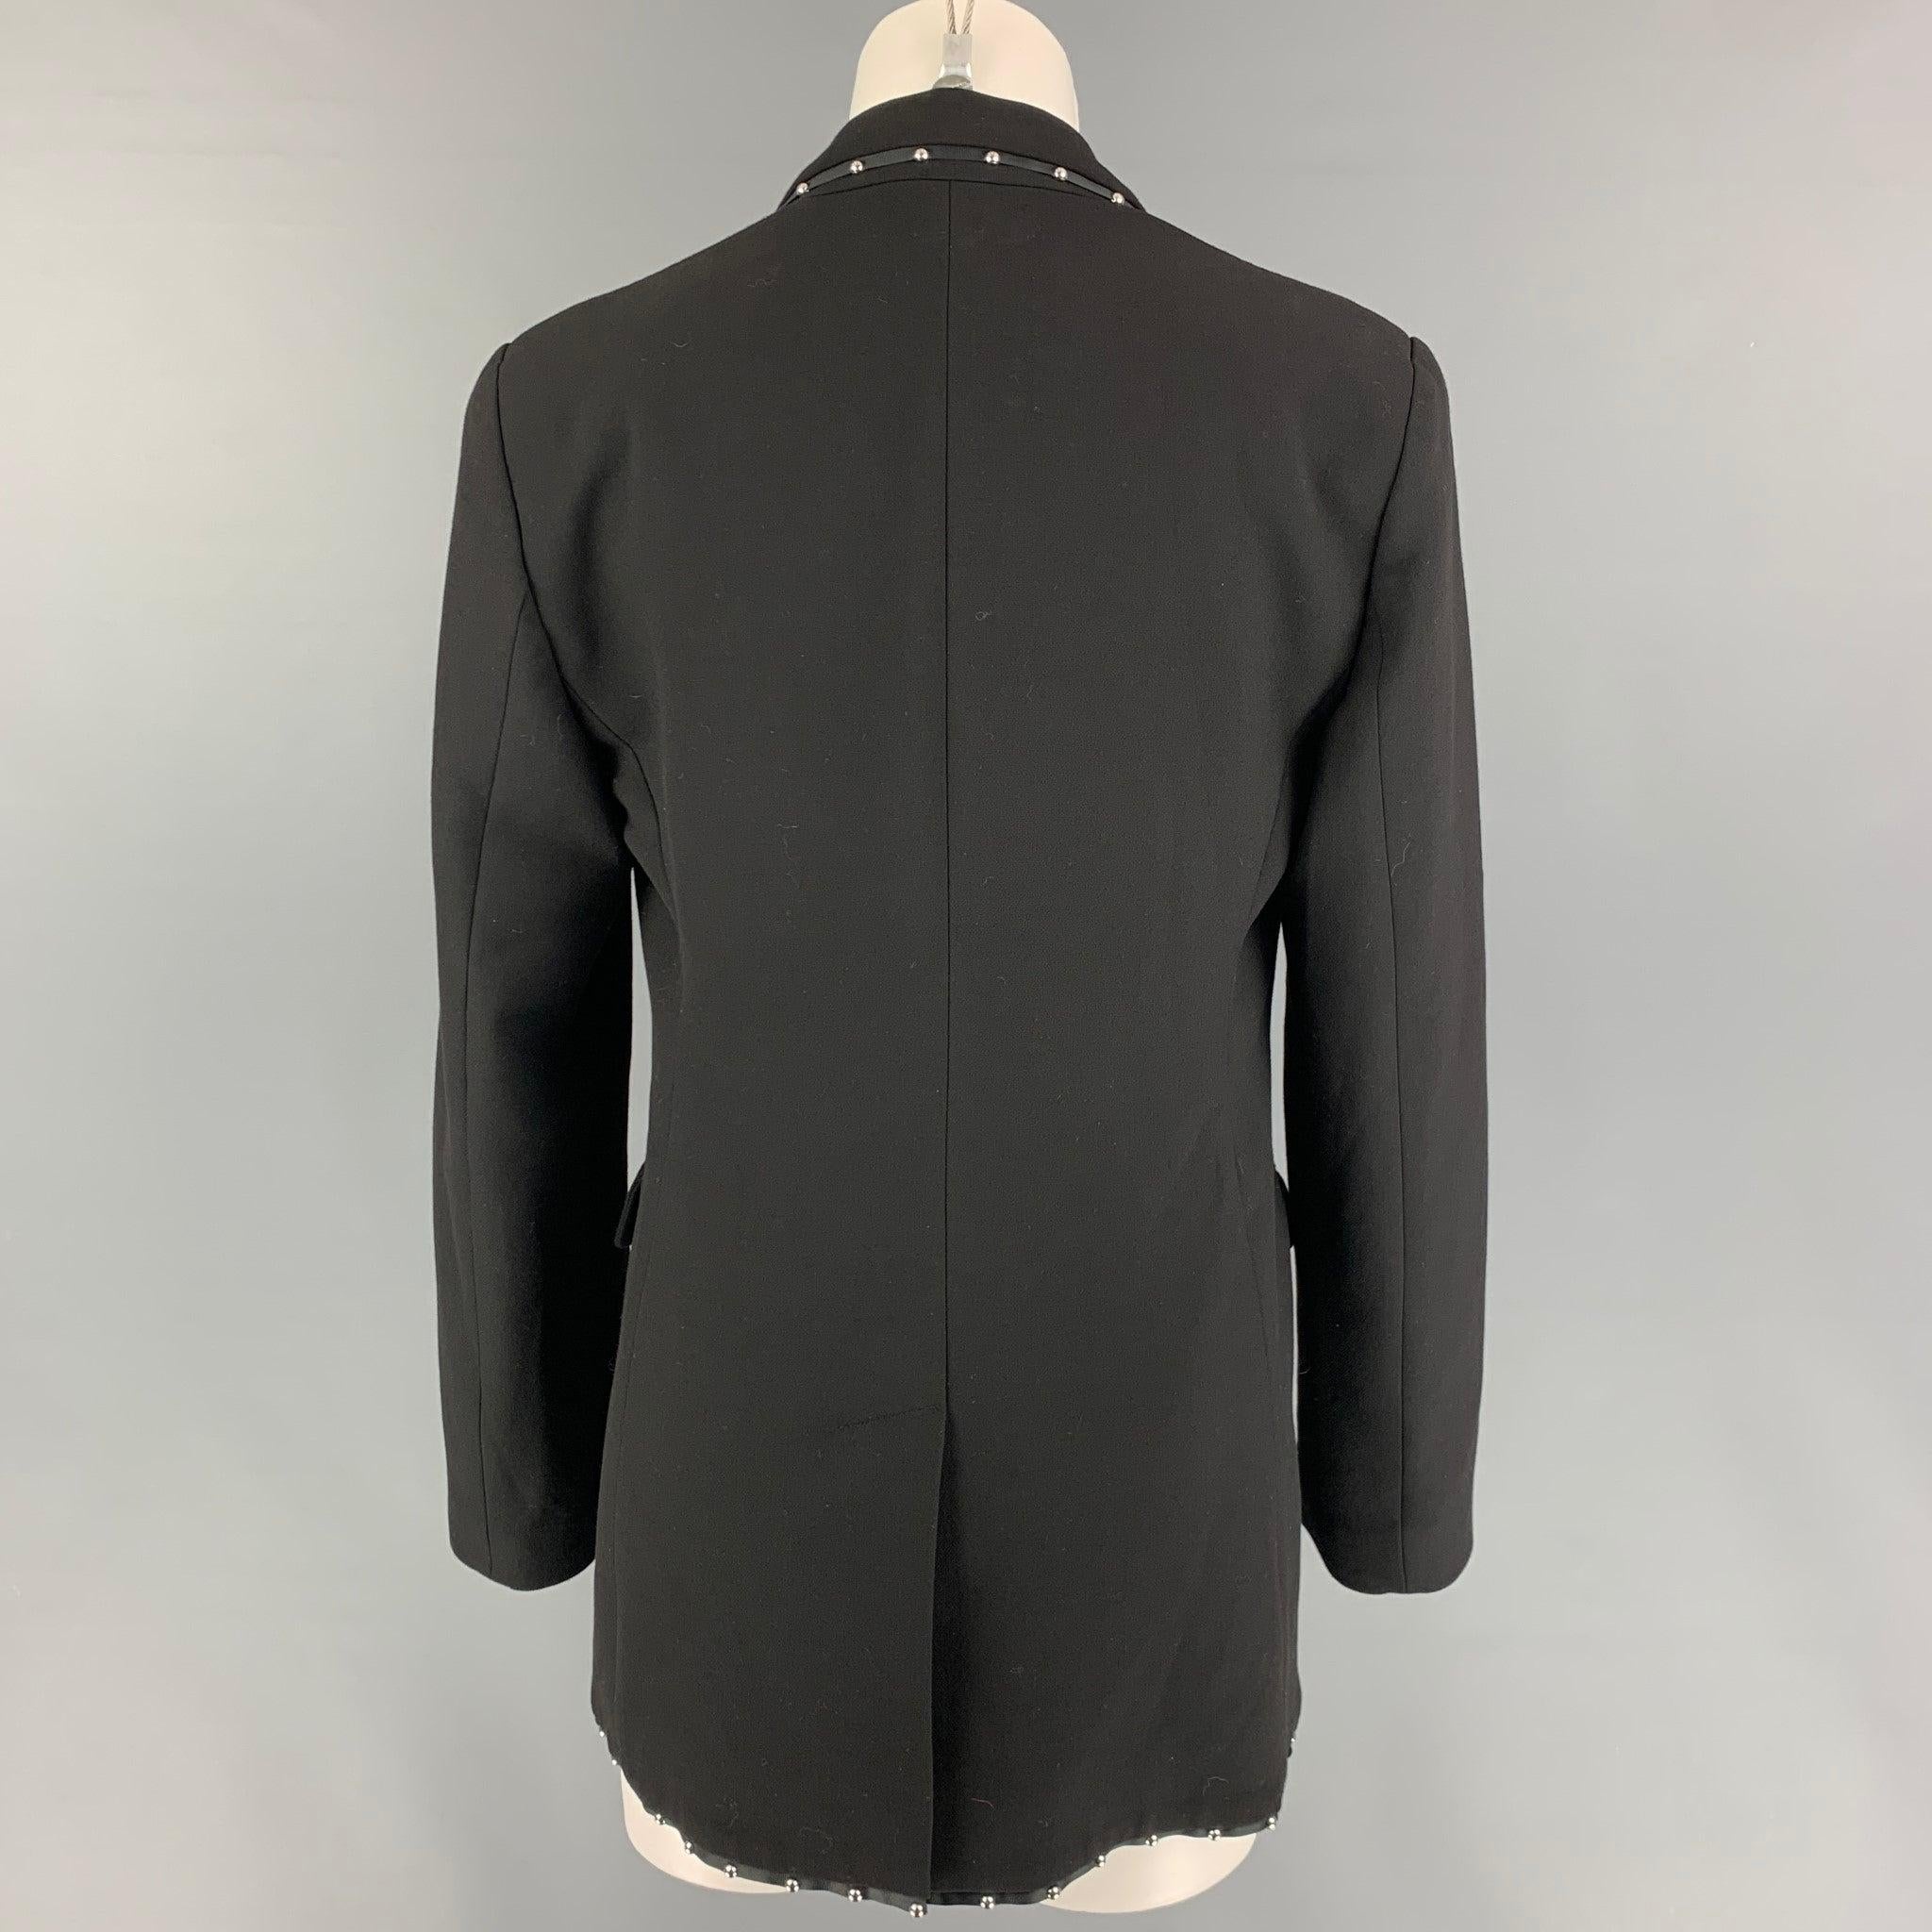 EMPORIO ARMANI Size M Black Wool Blend Studded Jacket Blazer In Good Condition For Sale In San Francisco, CA